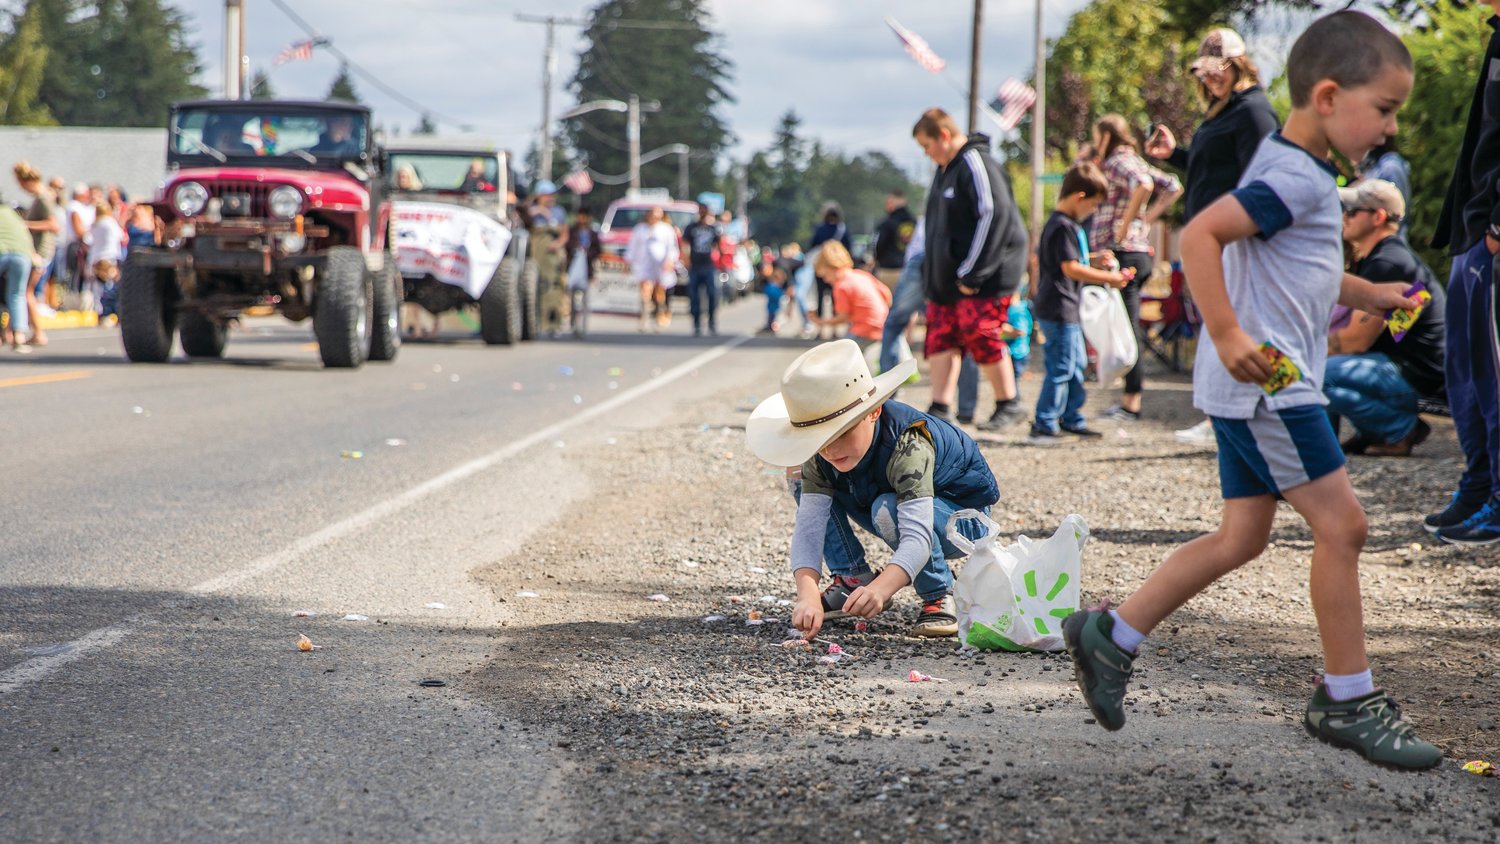 Patrick Thomas, 7, of Rainier, sports a cowboy hat while picking up candy during the Round Up Days parade Saturday morning.